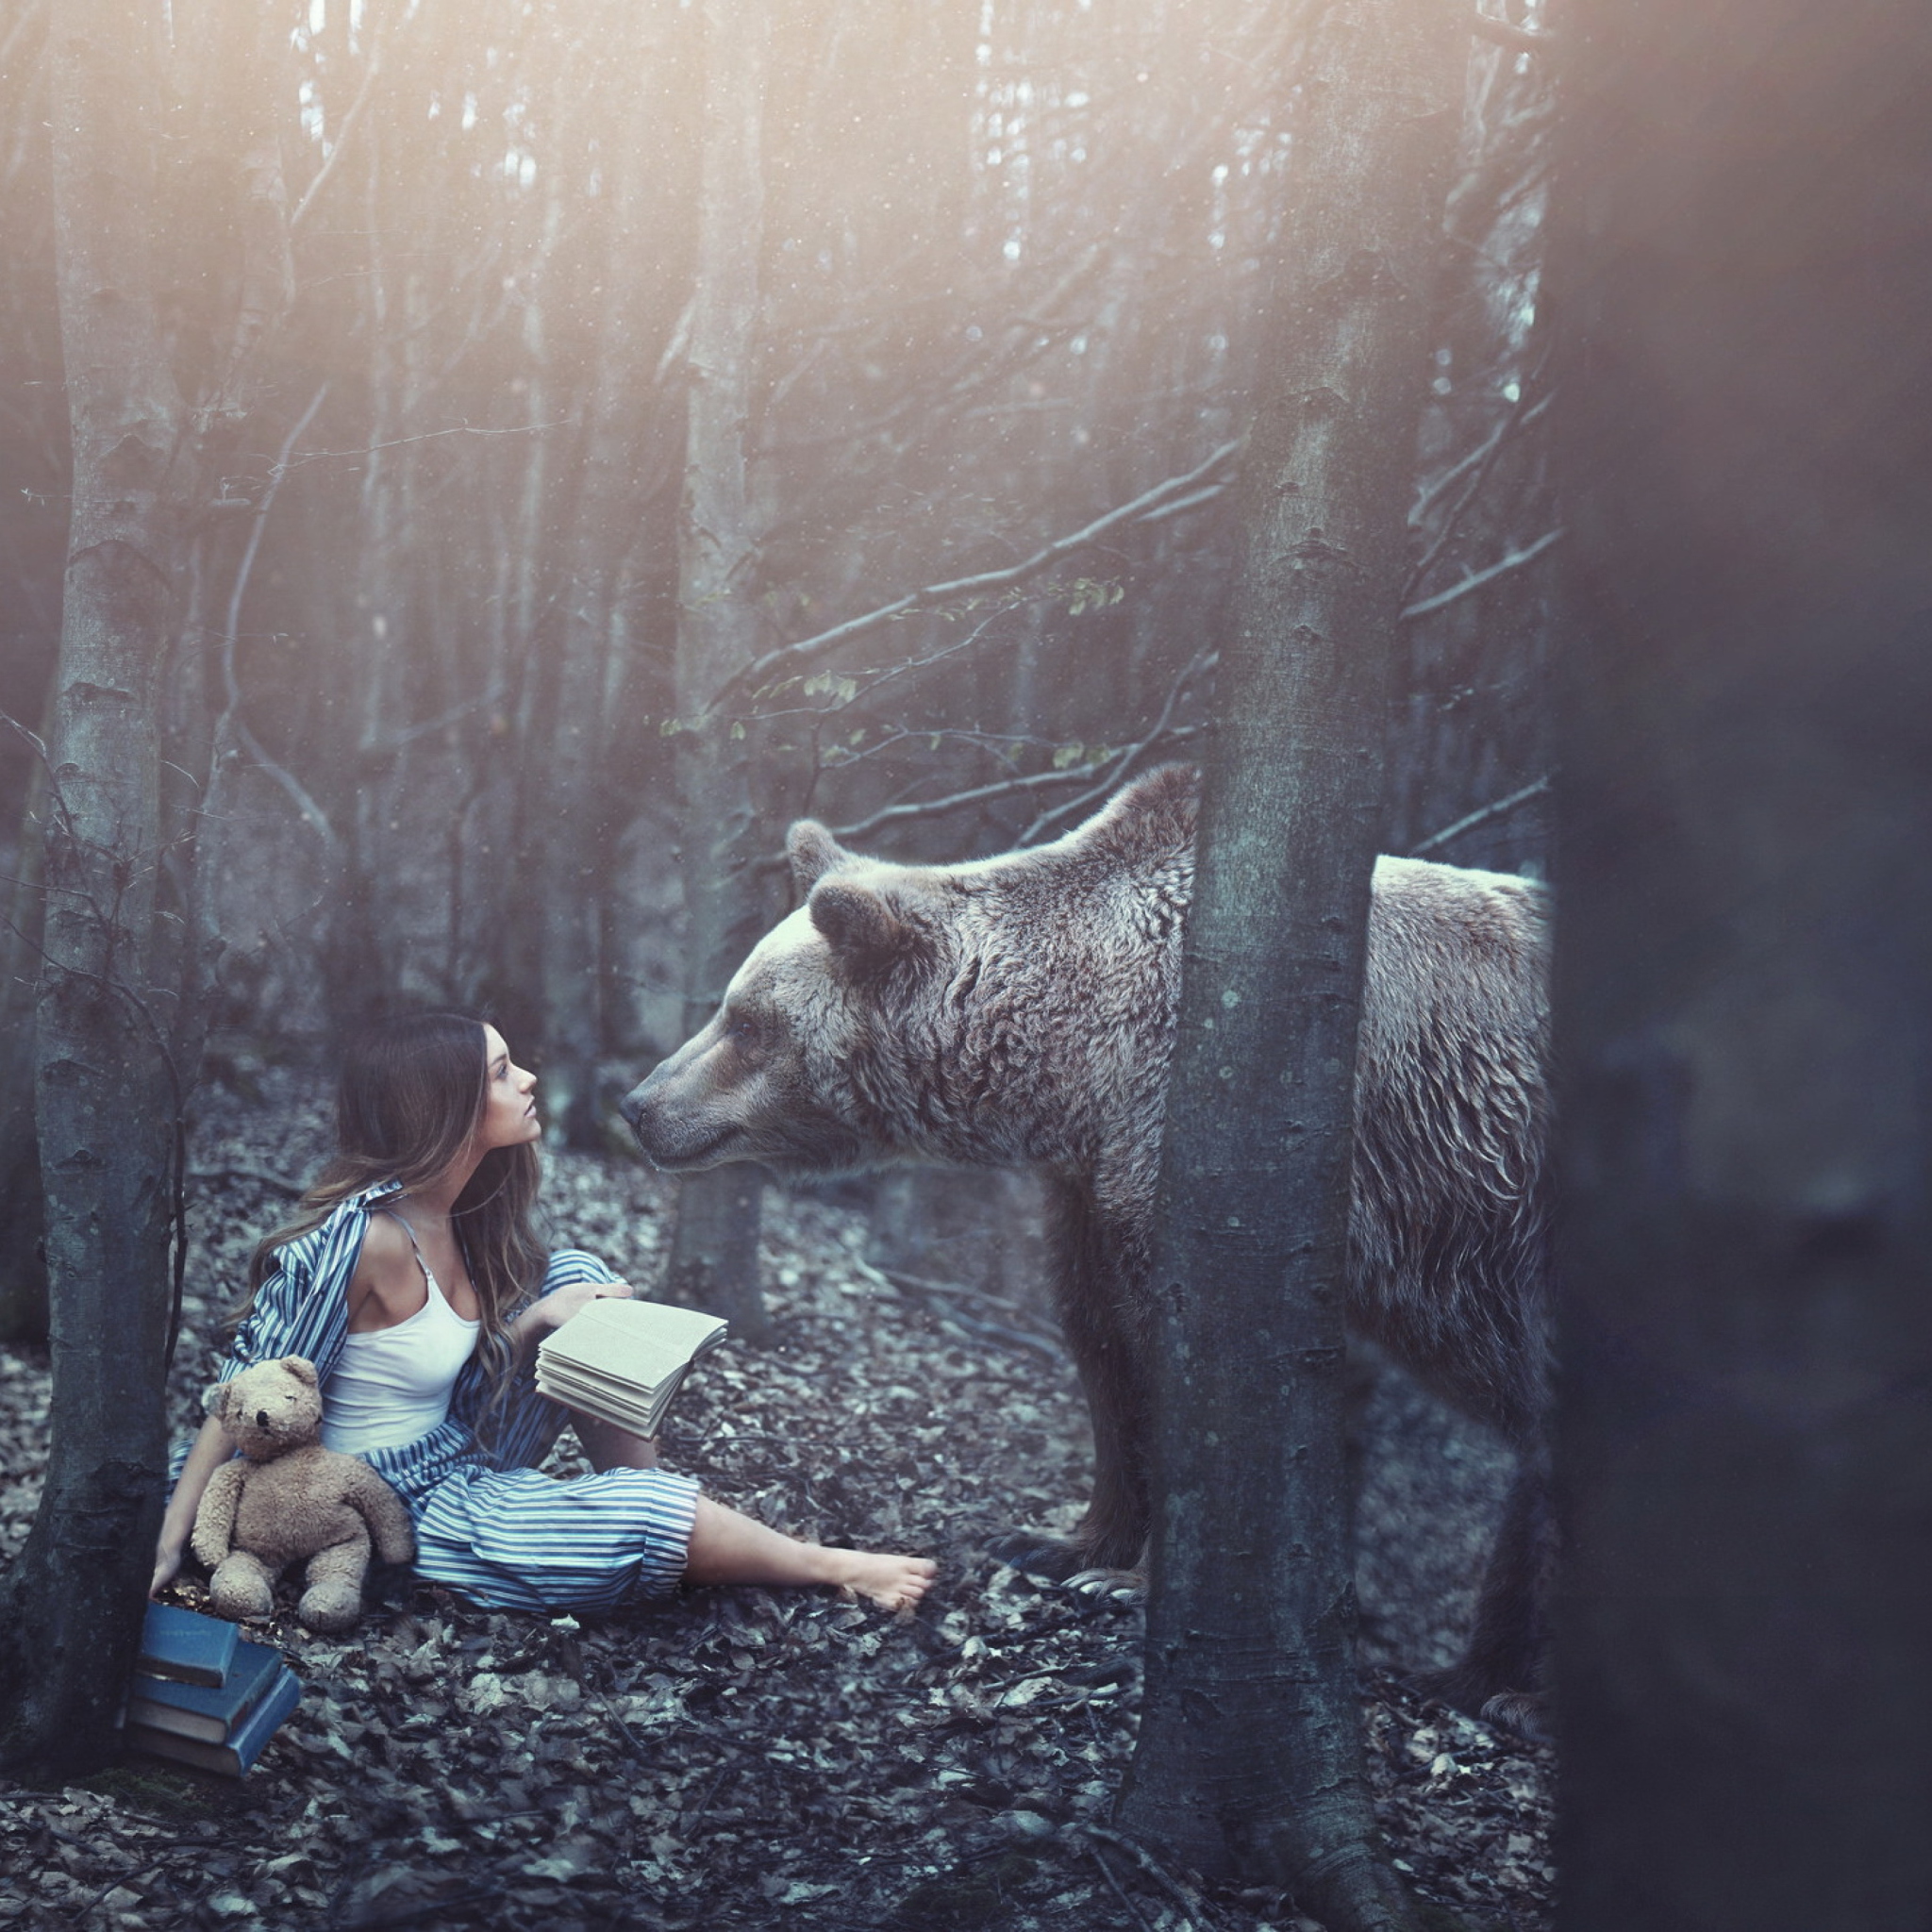 Girl And Two Bears In Forest By Rosie Hardy Photographer wallpaper 2048x2048